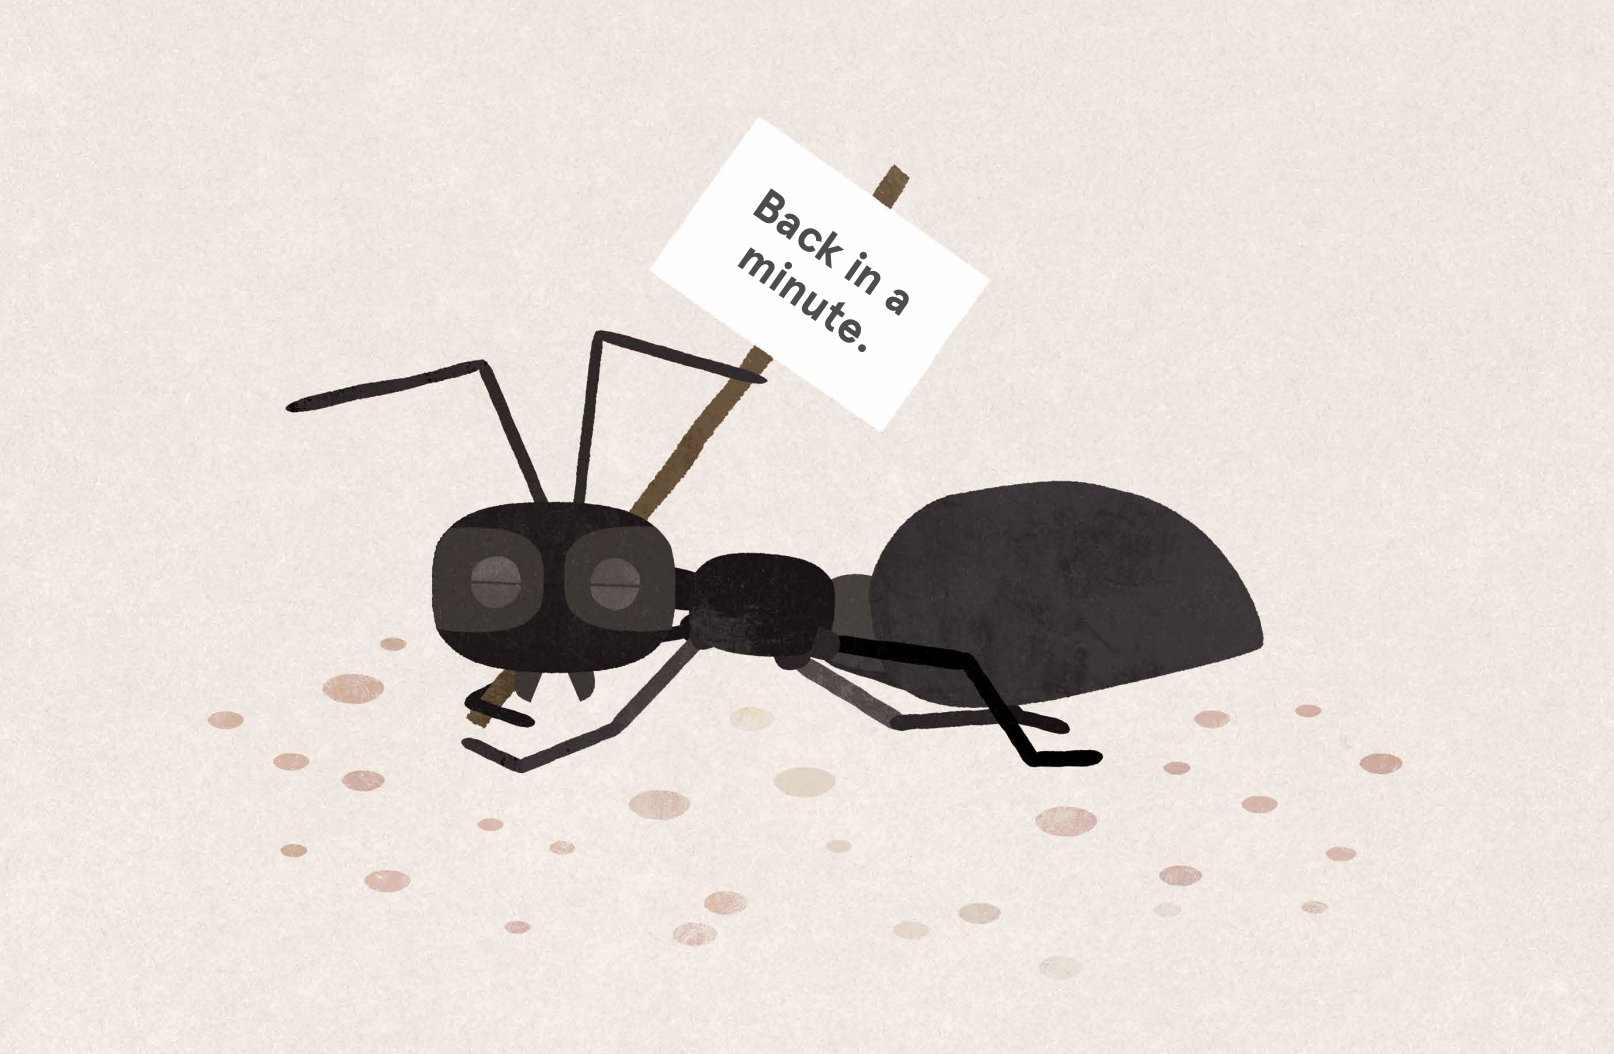 Illustration of a sleeping ant